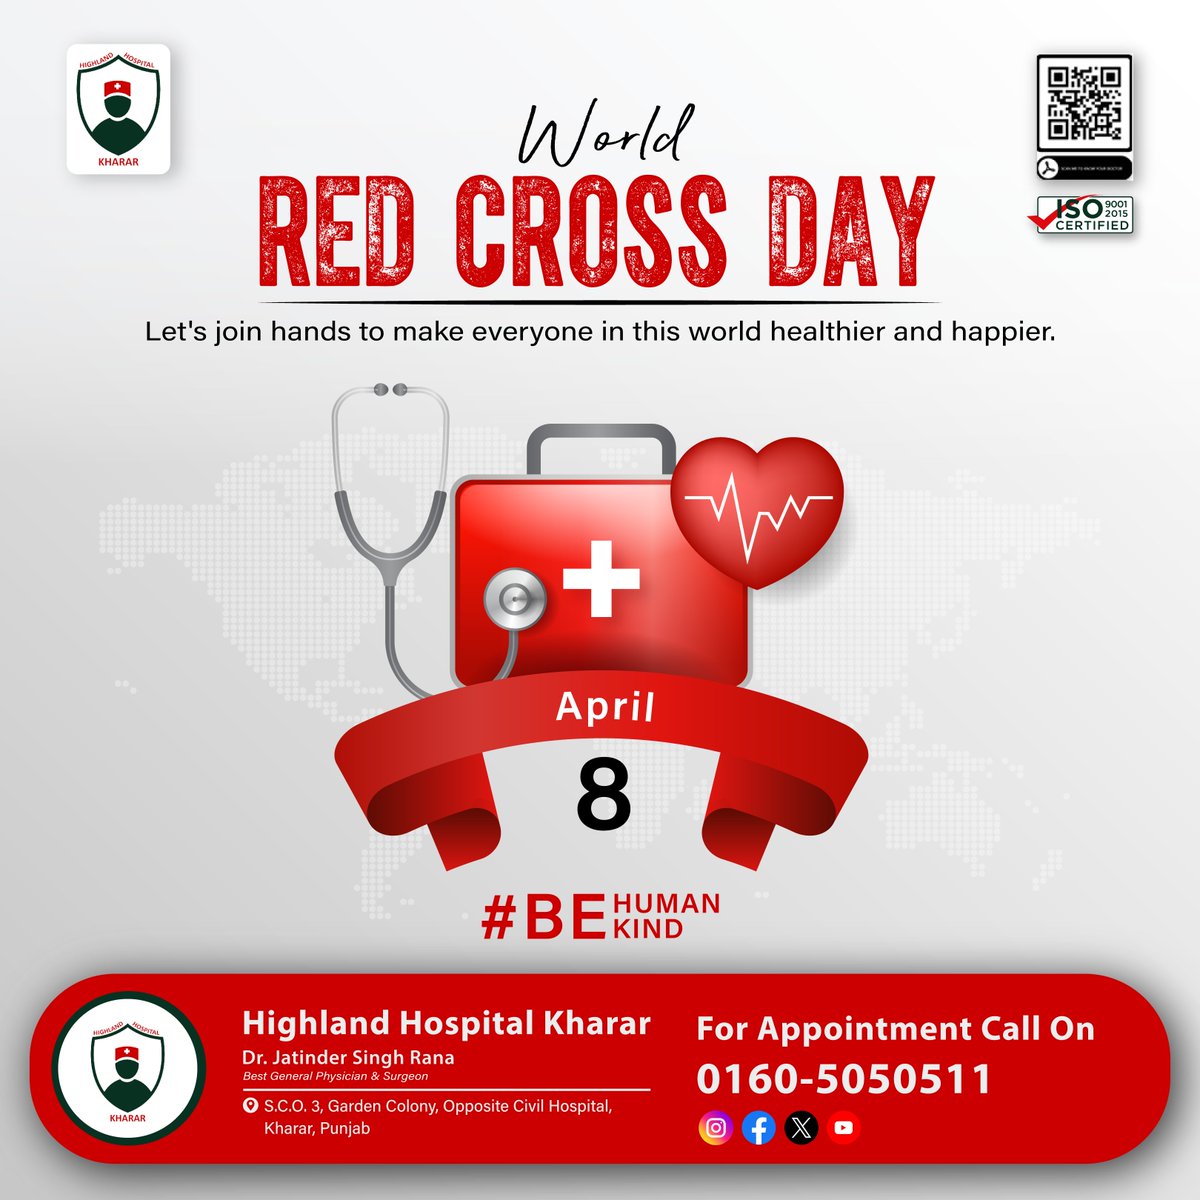 On this #WorldRedCrossDay, let's honor the spirit of humanity that binds us all. At #HighlandHospitalKharar, we stand with the Red Cross in their mission to alleviate #human_suffering. 
.
#health #Kharar #Mohali #DrJatinderSingh #Besthospital #MedicalSupport #HealthAwareness